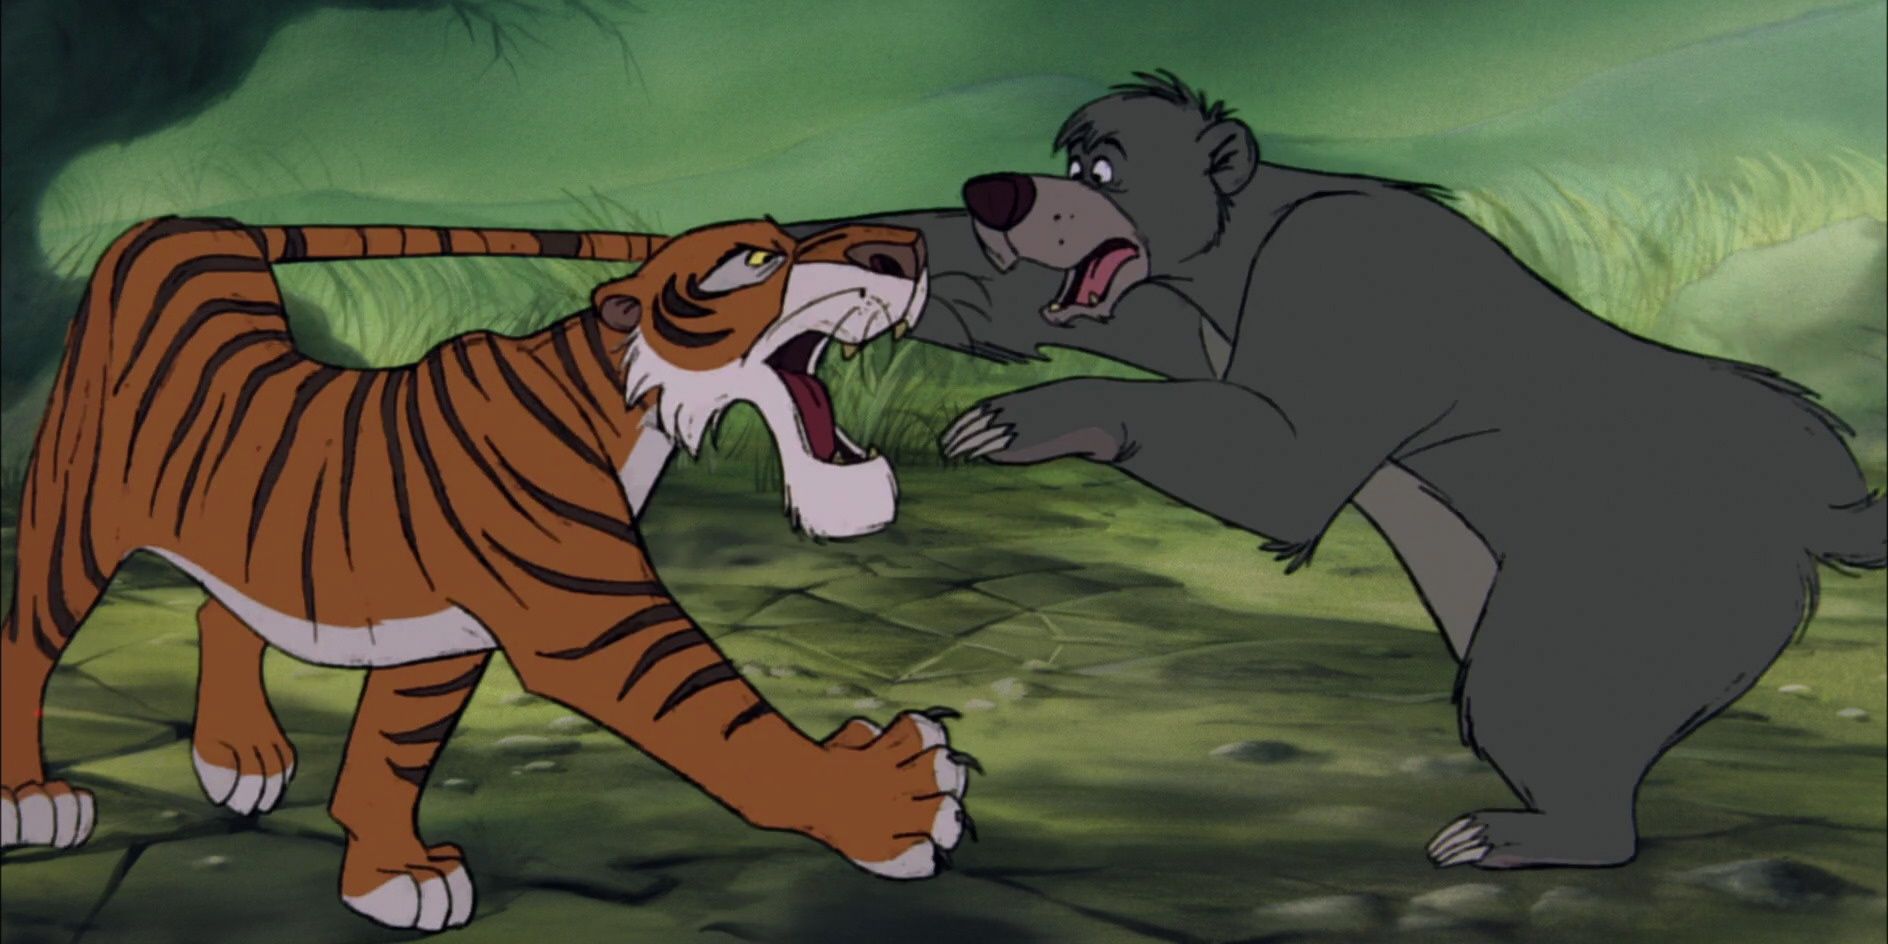 Shere Khan Baloo Fighting in The Jungle Book from 1967